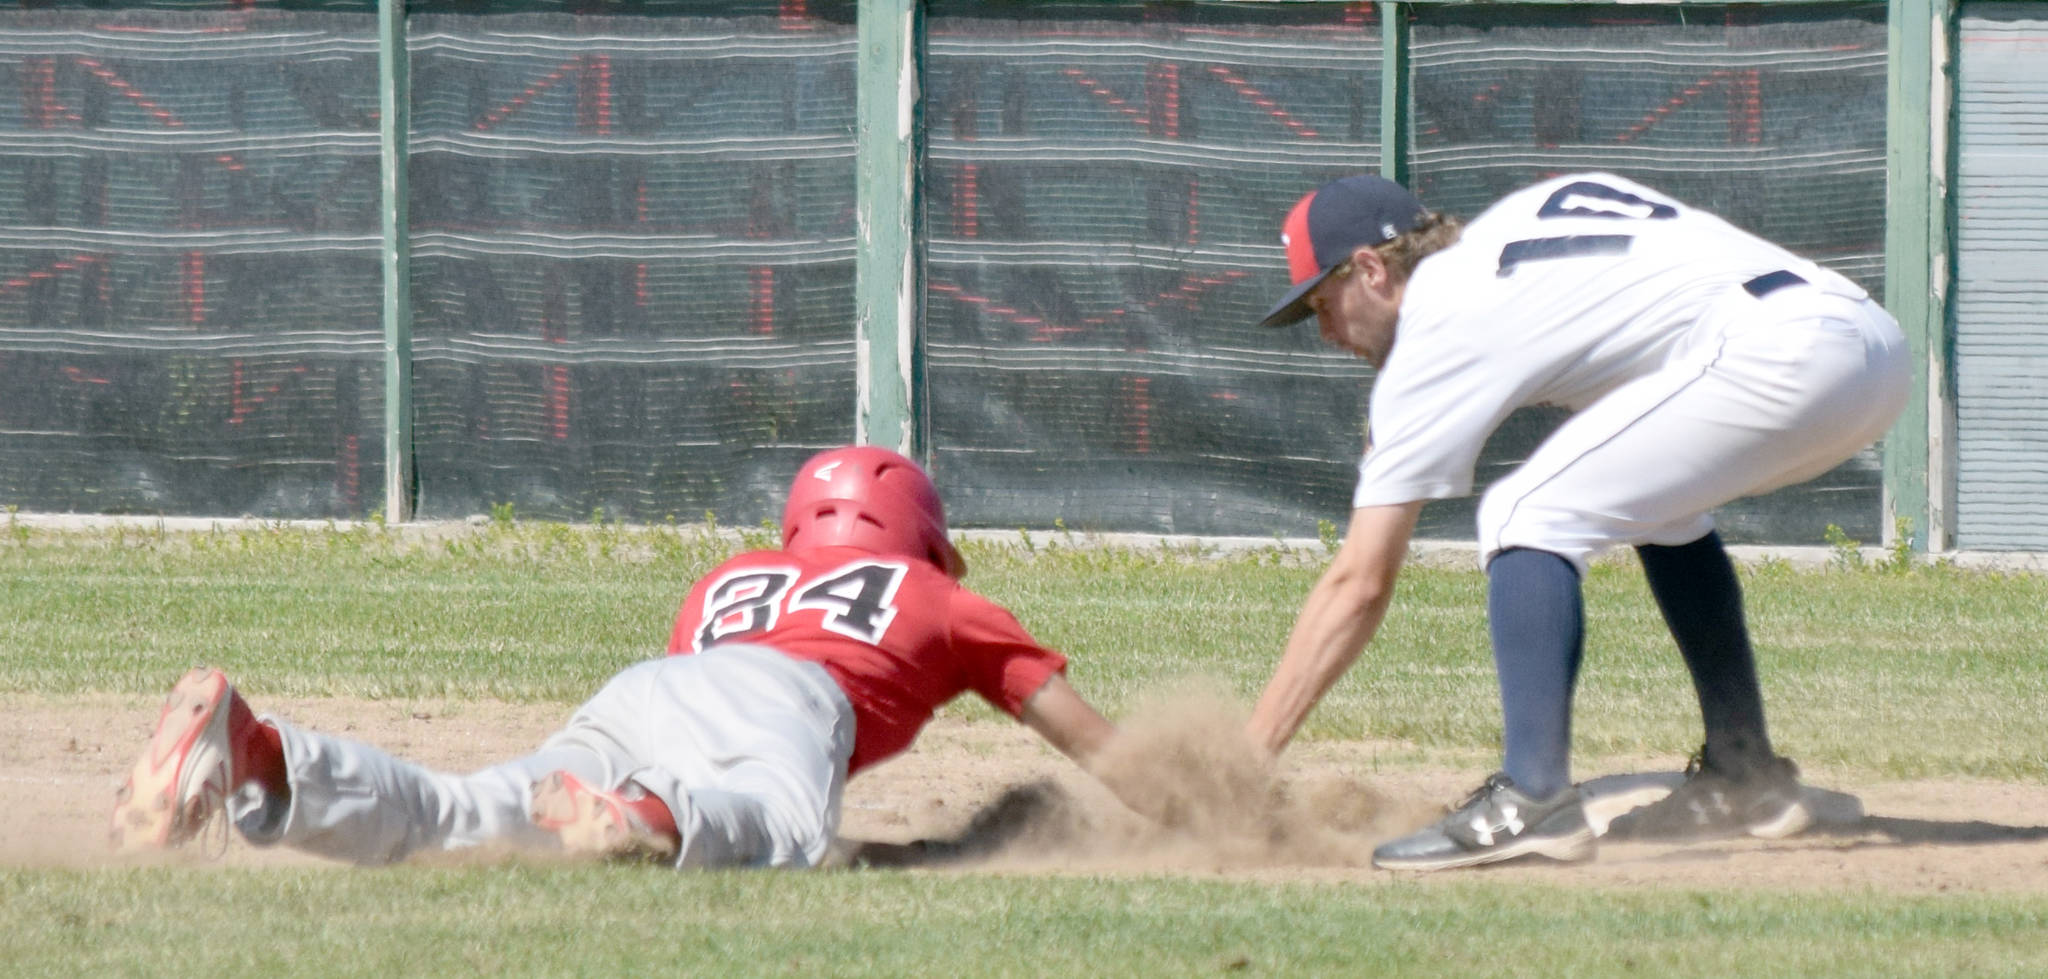 Post 20 first baseman Seth Adkins tags out Axel Shanks of Napoleon (Ohio) Post 300 on Wednesday, July 3, 2019, at Coral Seymour Memorial Park in Kenai, Alaska. Twins pitcher Mose Hayes picked off Shanks. (Photo by Jeff Helminiak/Peninsula Clarion)